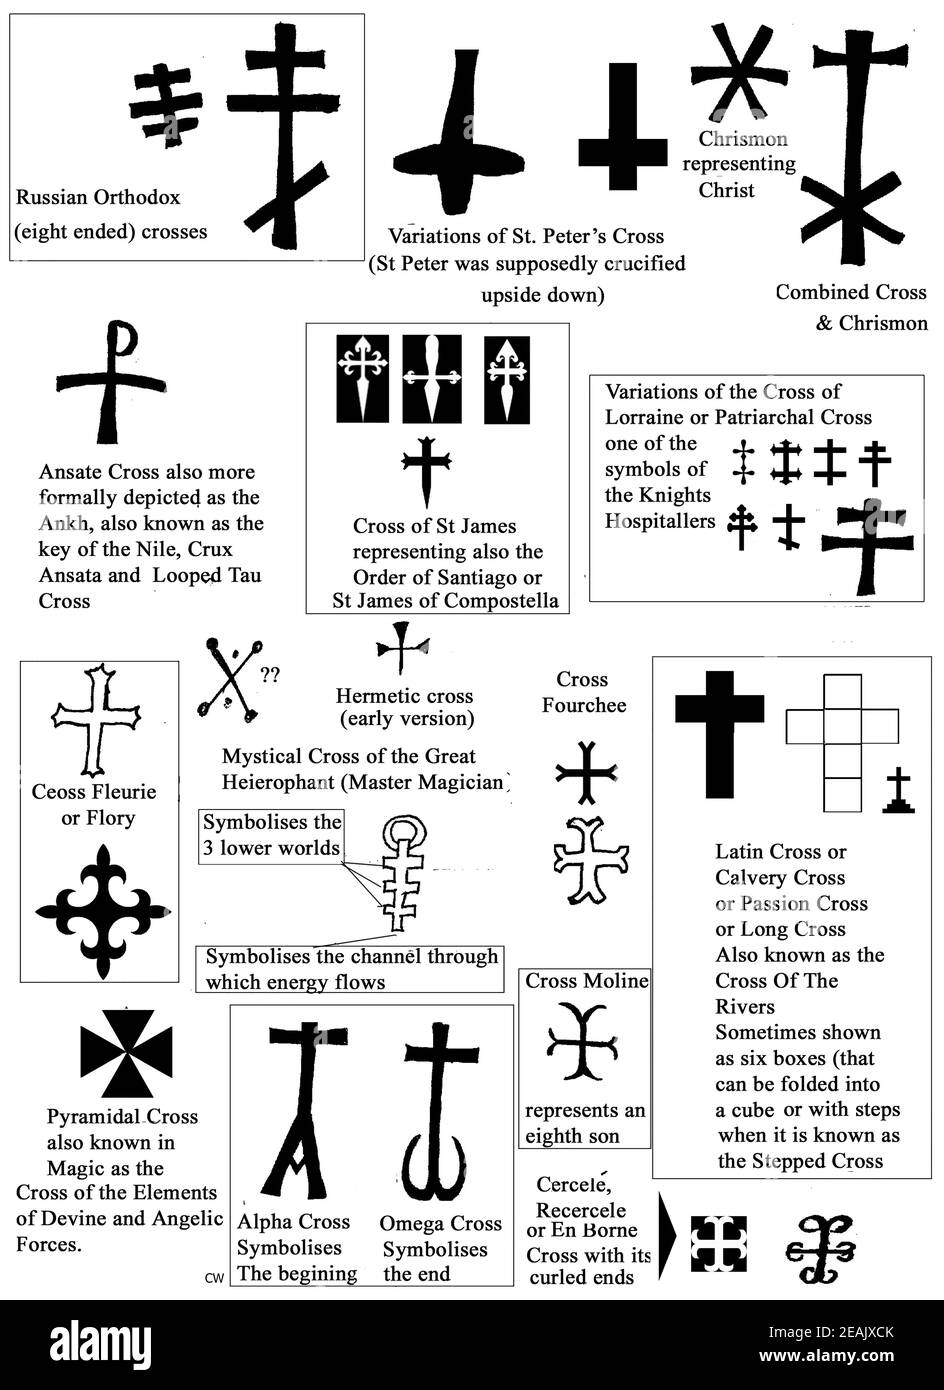 SYMBOLISM - Various crosses and their meanings -  These crosses are variously known as Russian Orthodox St Peters,chrismon,combined,ansate, ankh,key of the Nile,  Crux Ansata, looped tau, st James, lorraine, patriarchal, knights hospitallers, Fleurie or Flory,  hermetic, latin, mystical cross of the great heirophant (magician),moline, calvary, long cross, cross of the rivers, pyramidl, cross of the elements, divine and angelic forces, alpha, omega,eighth son,cercese, recercele, en borne,stepped, cube,cubed,cercele, etc. Stock Photo